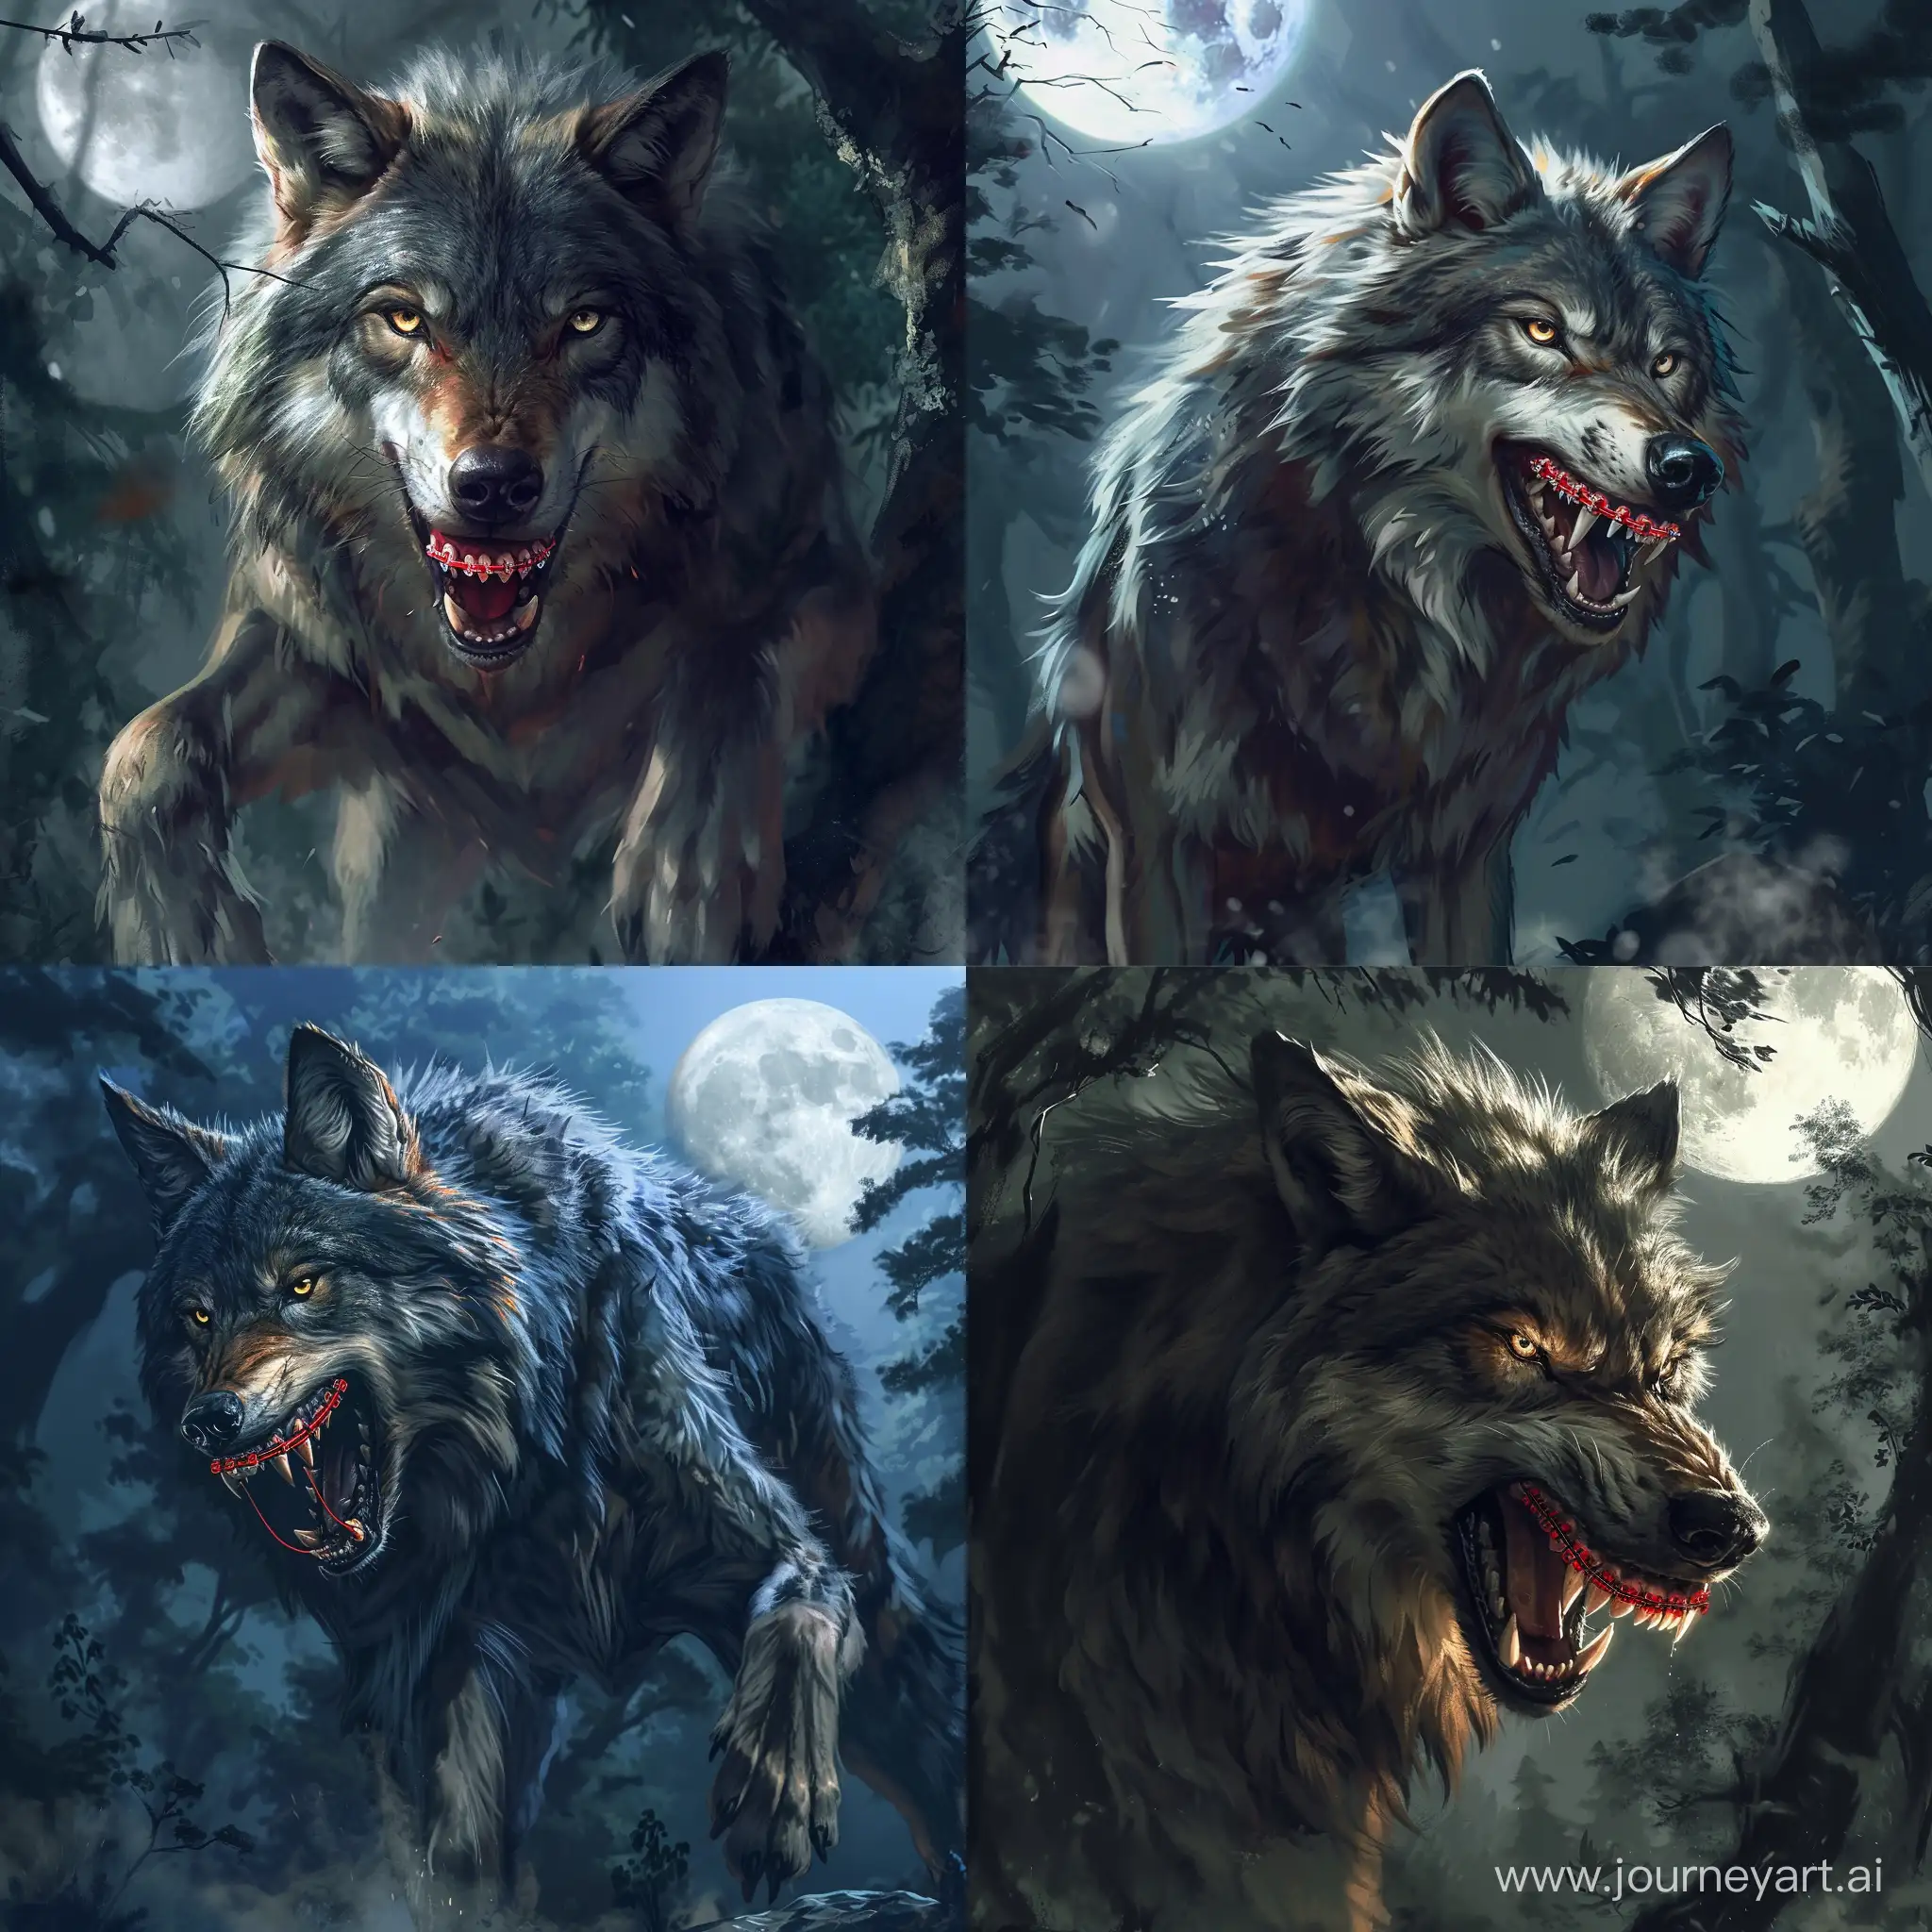 A majestic, wild wolf with a sleek coat of fur, standing proudly in a moonlit forest. Its eyes glint with an intense, fiery gaze, and its powerful jaws are open to reveal striking, razor-sharp, red orthodontic teeth. The scene is shrouded in an aura of mystery, with a hint of danger and allure in the air